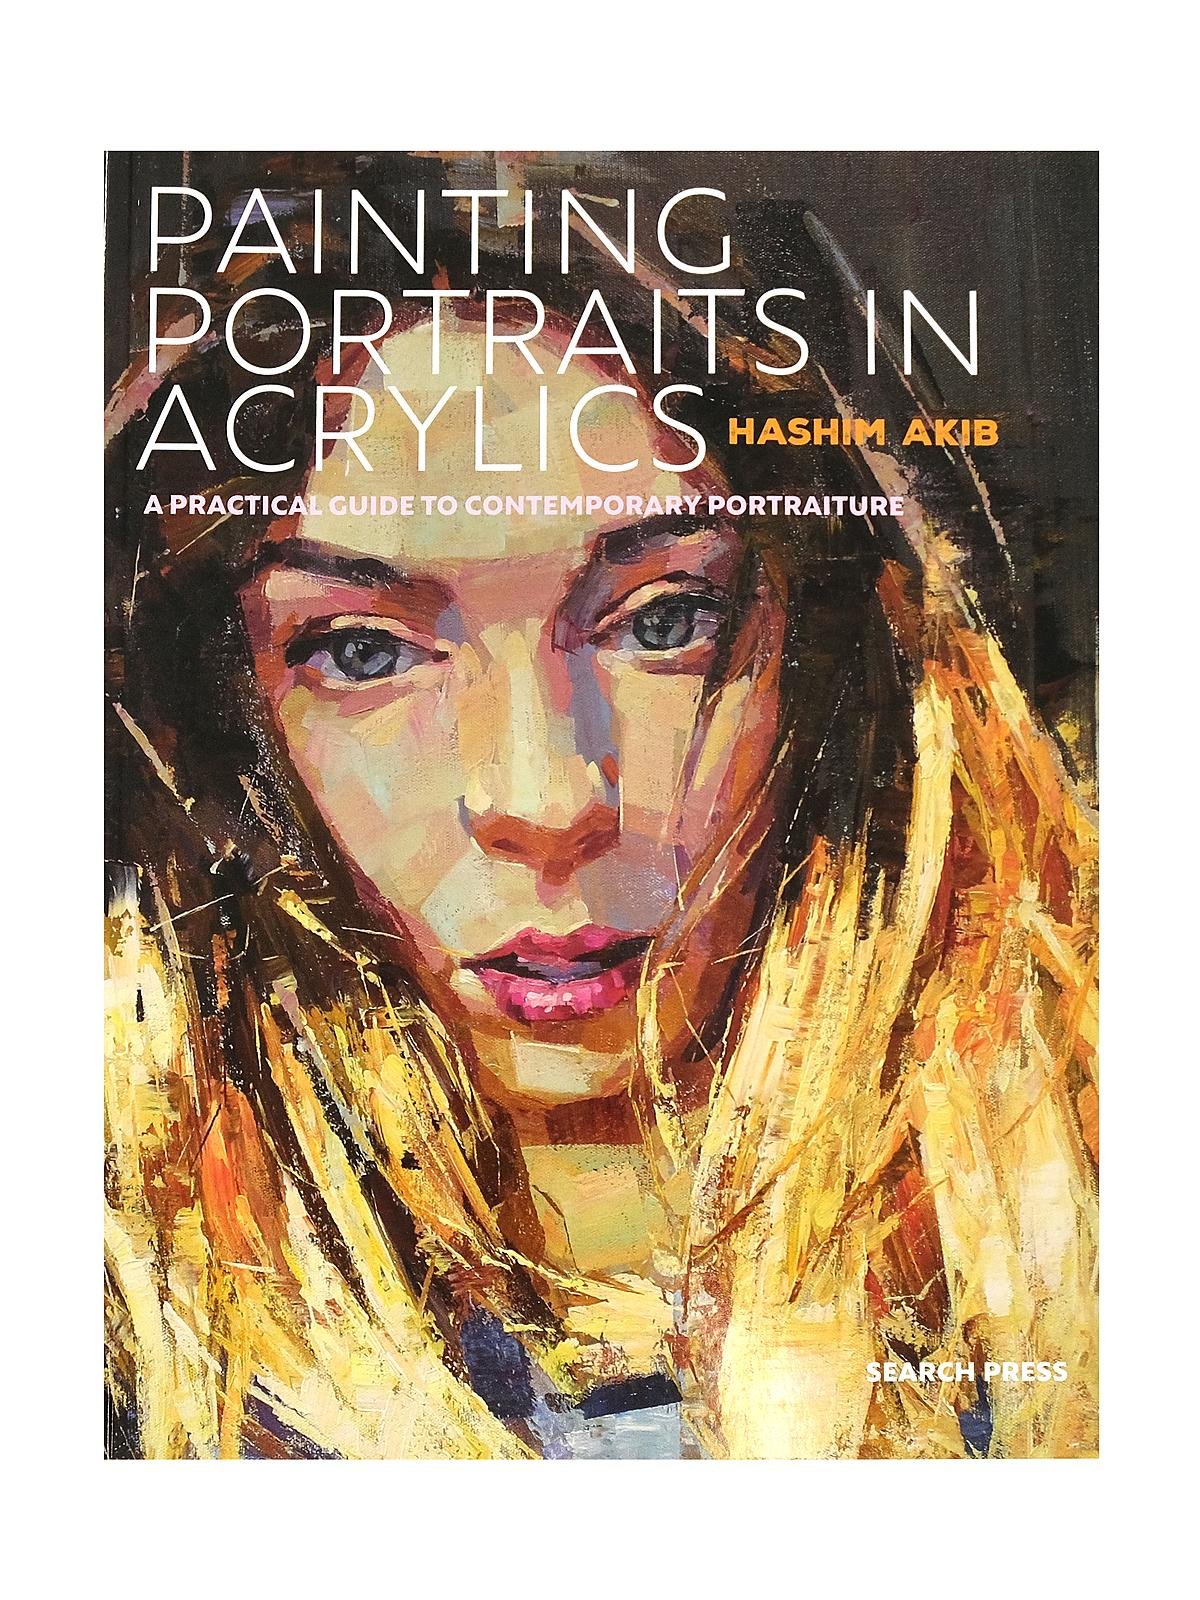 Search Press - Painting Portraits in Acrylics